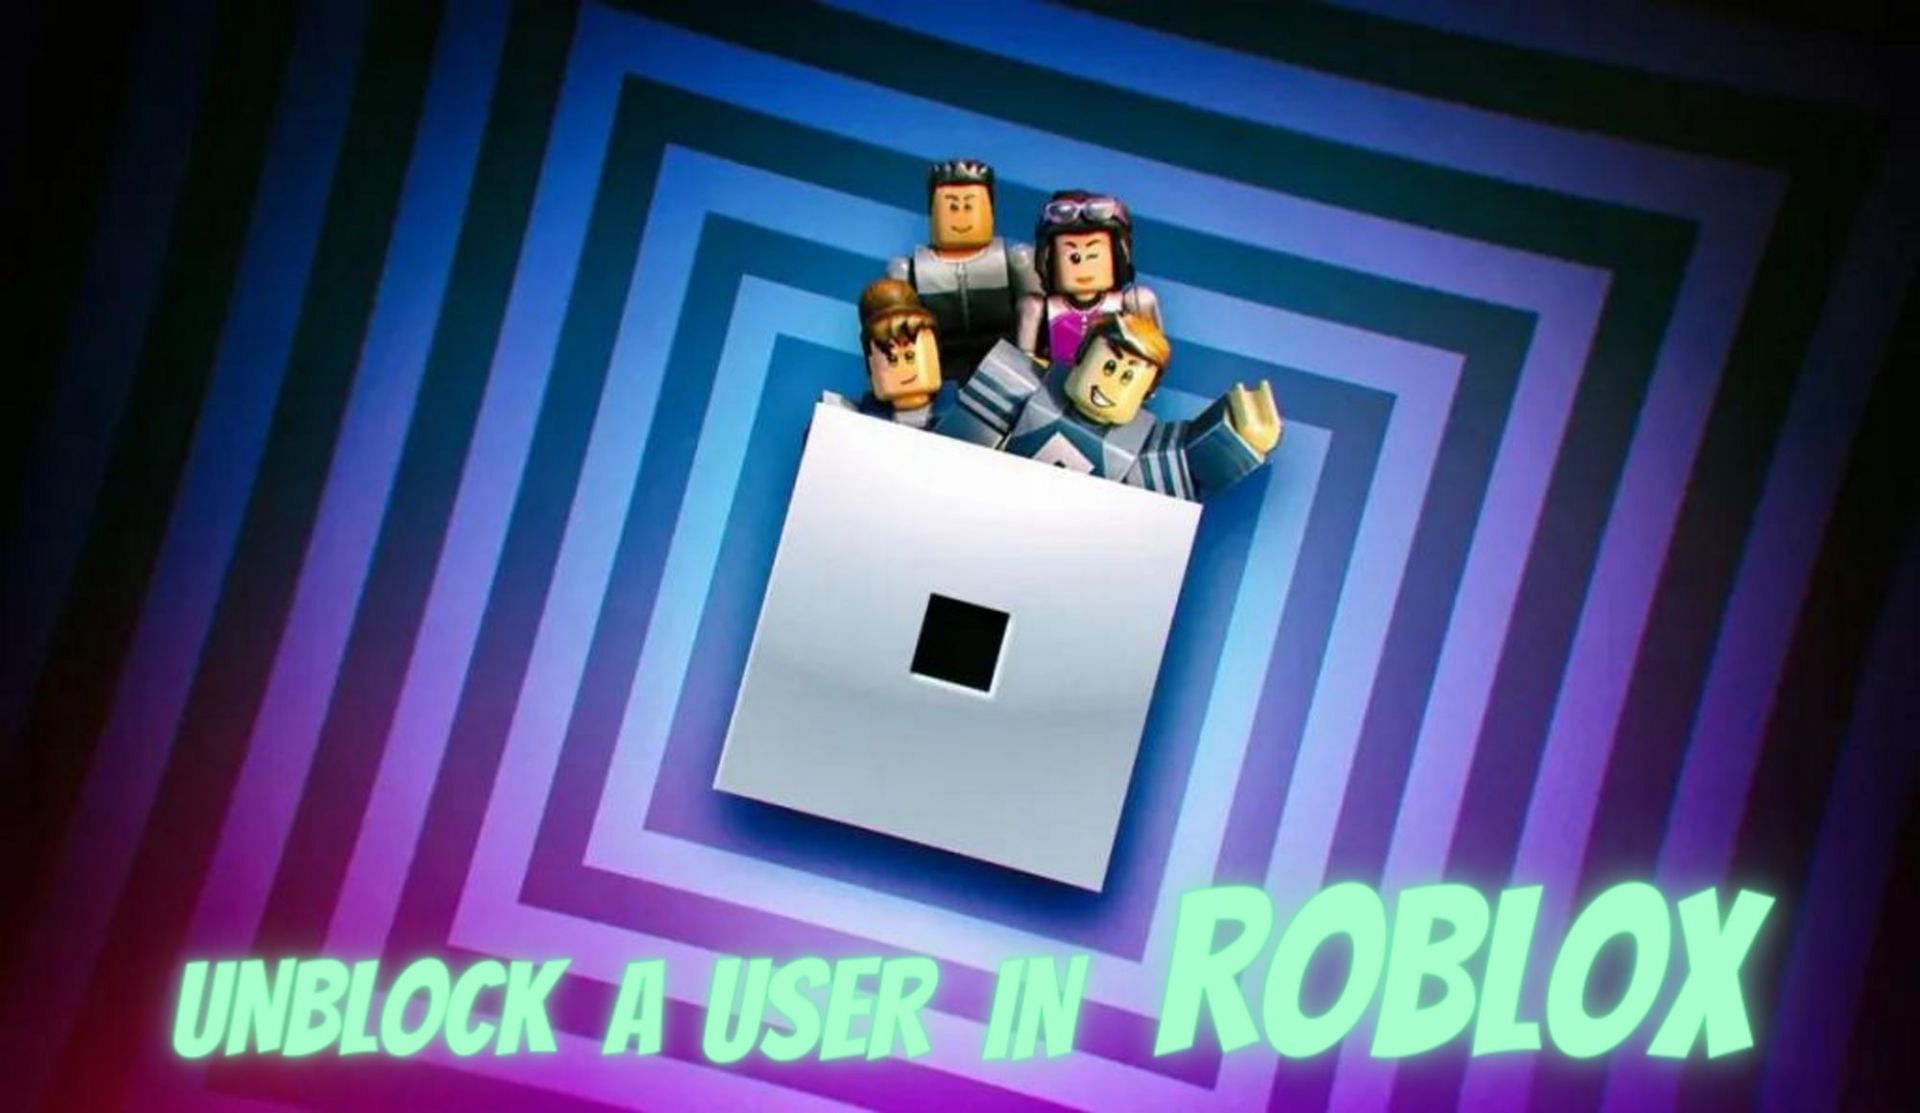 play roblox unblocked online